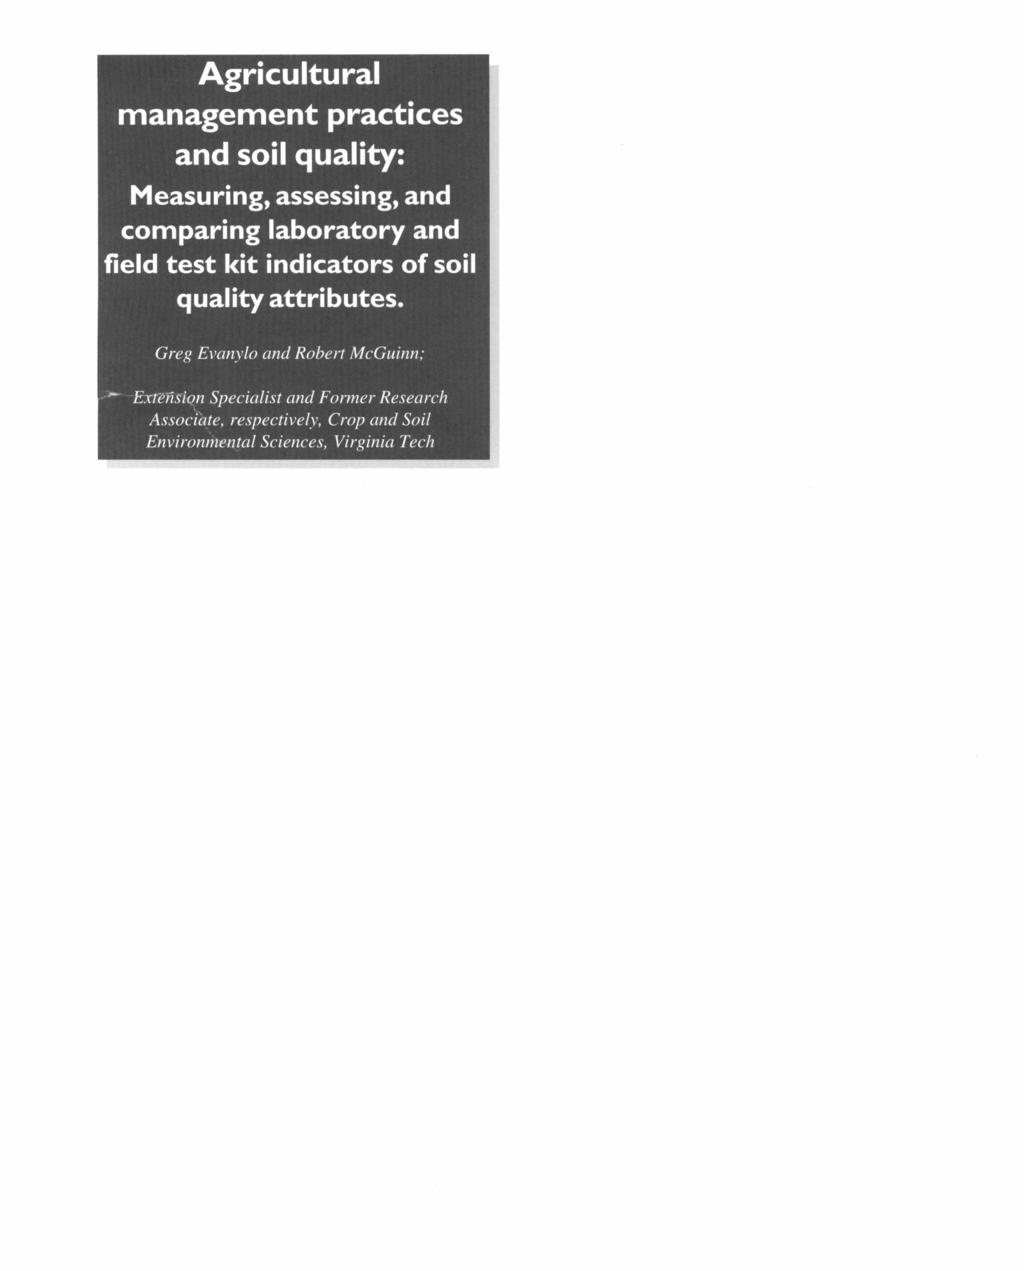 Agricultural management practices and soil quality: Measuring, assessing, and comparing laboratory and field test kit indicators of soil quality attributes.